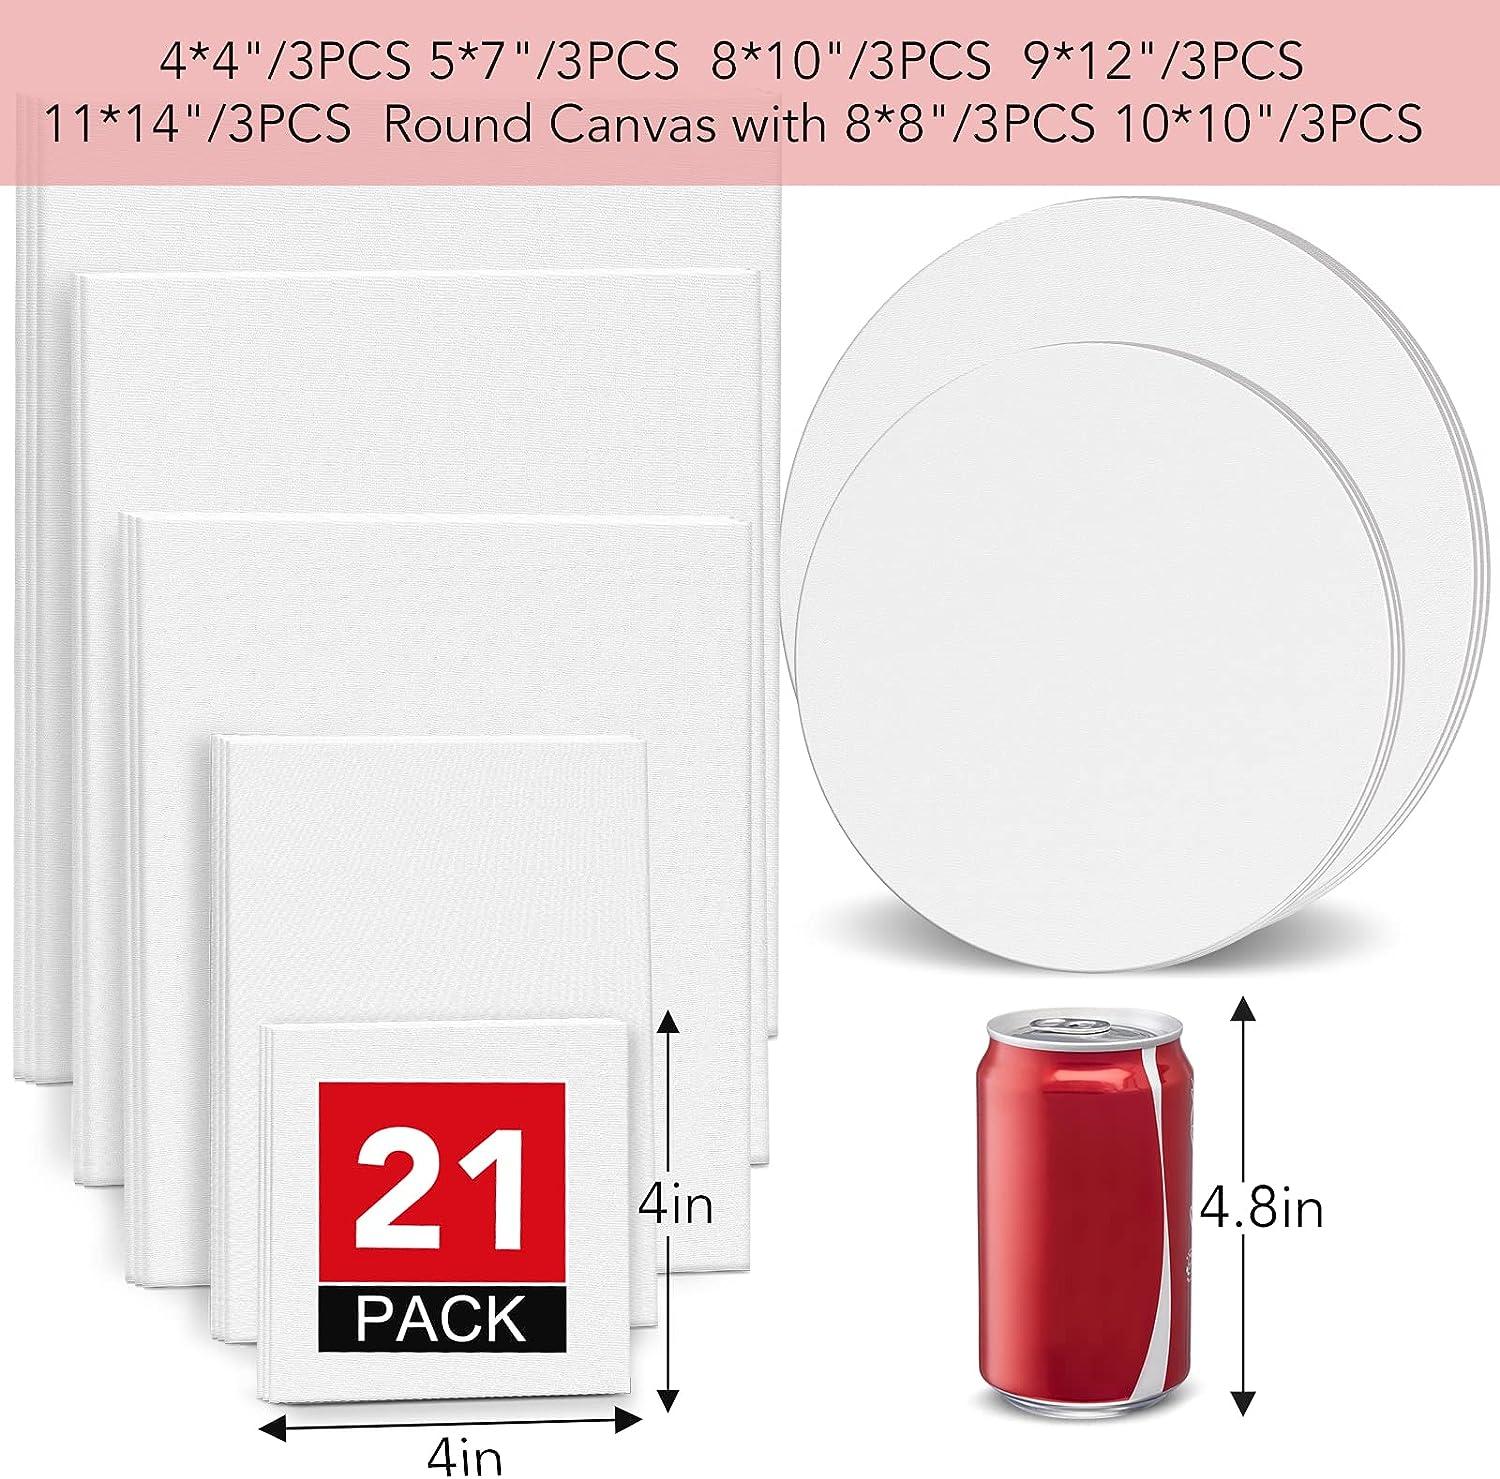 ESRICH Mini Canvases for Painting, Mini Canvas Bulk 100 Pack 2.4x2.4In,  2/5In Profile Small Square Canvases, Blank Canvases are Great for School